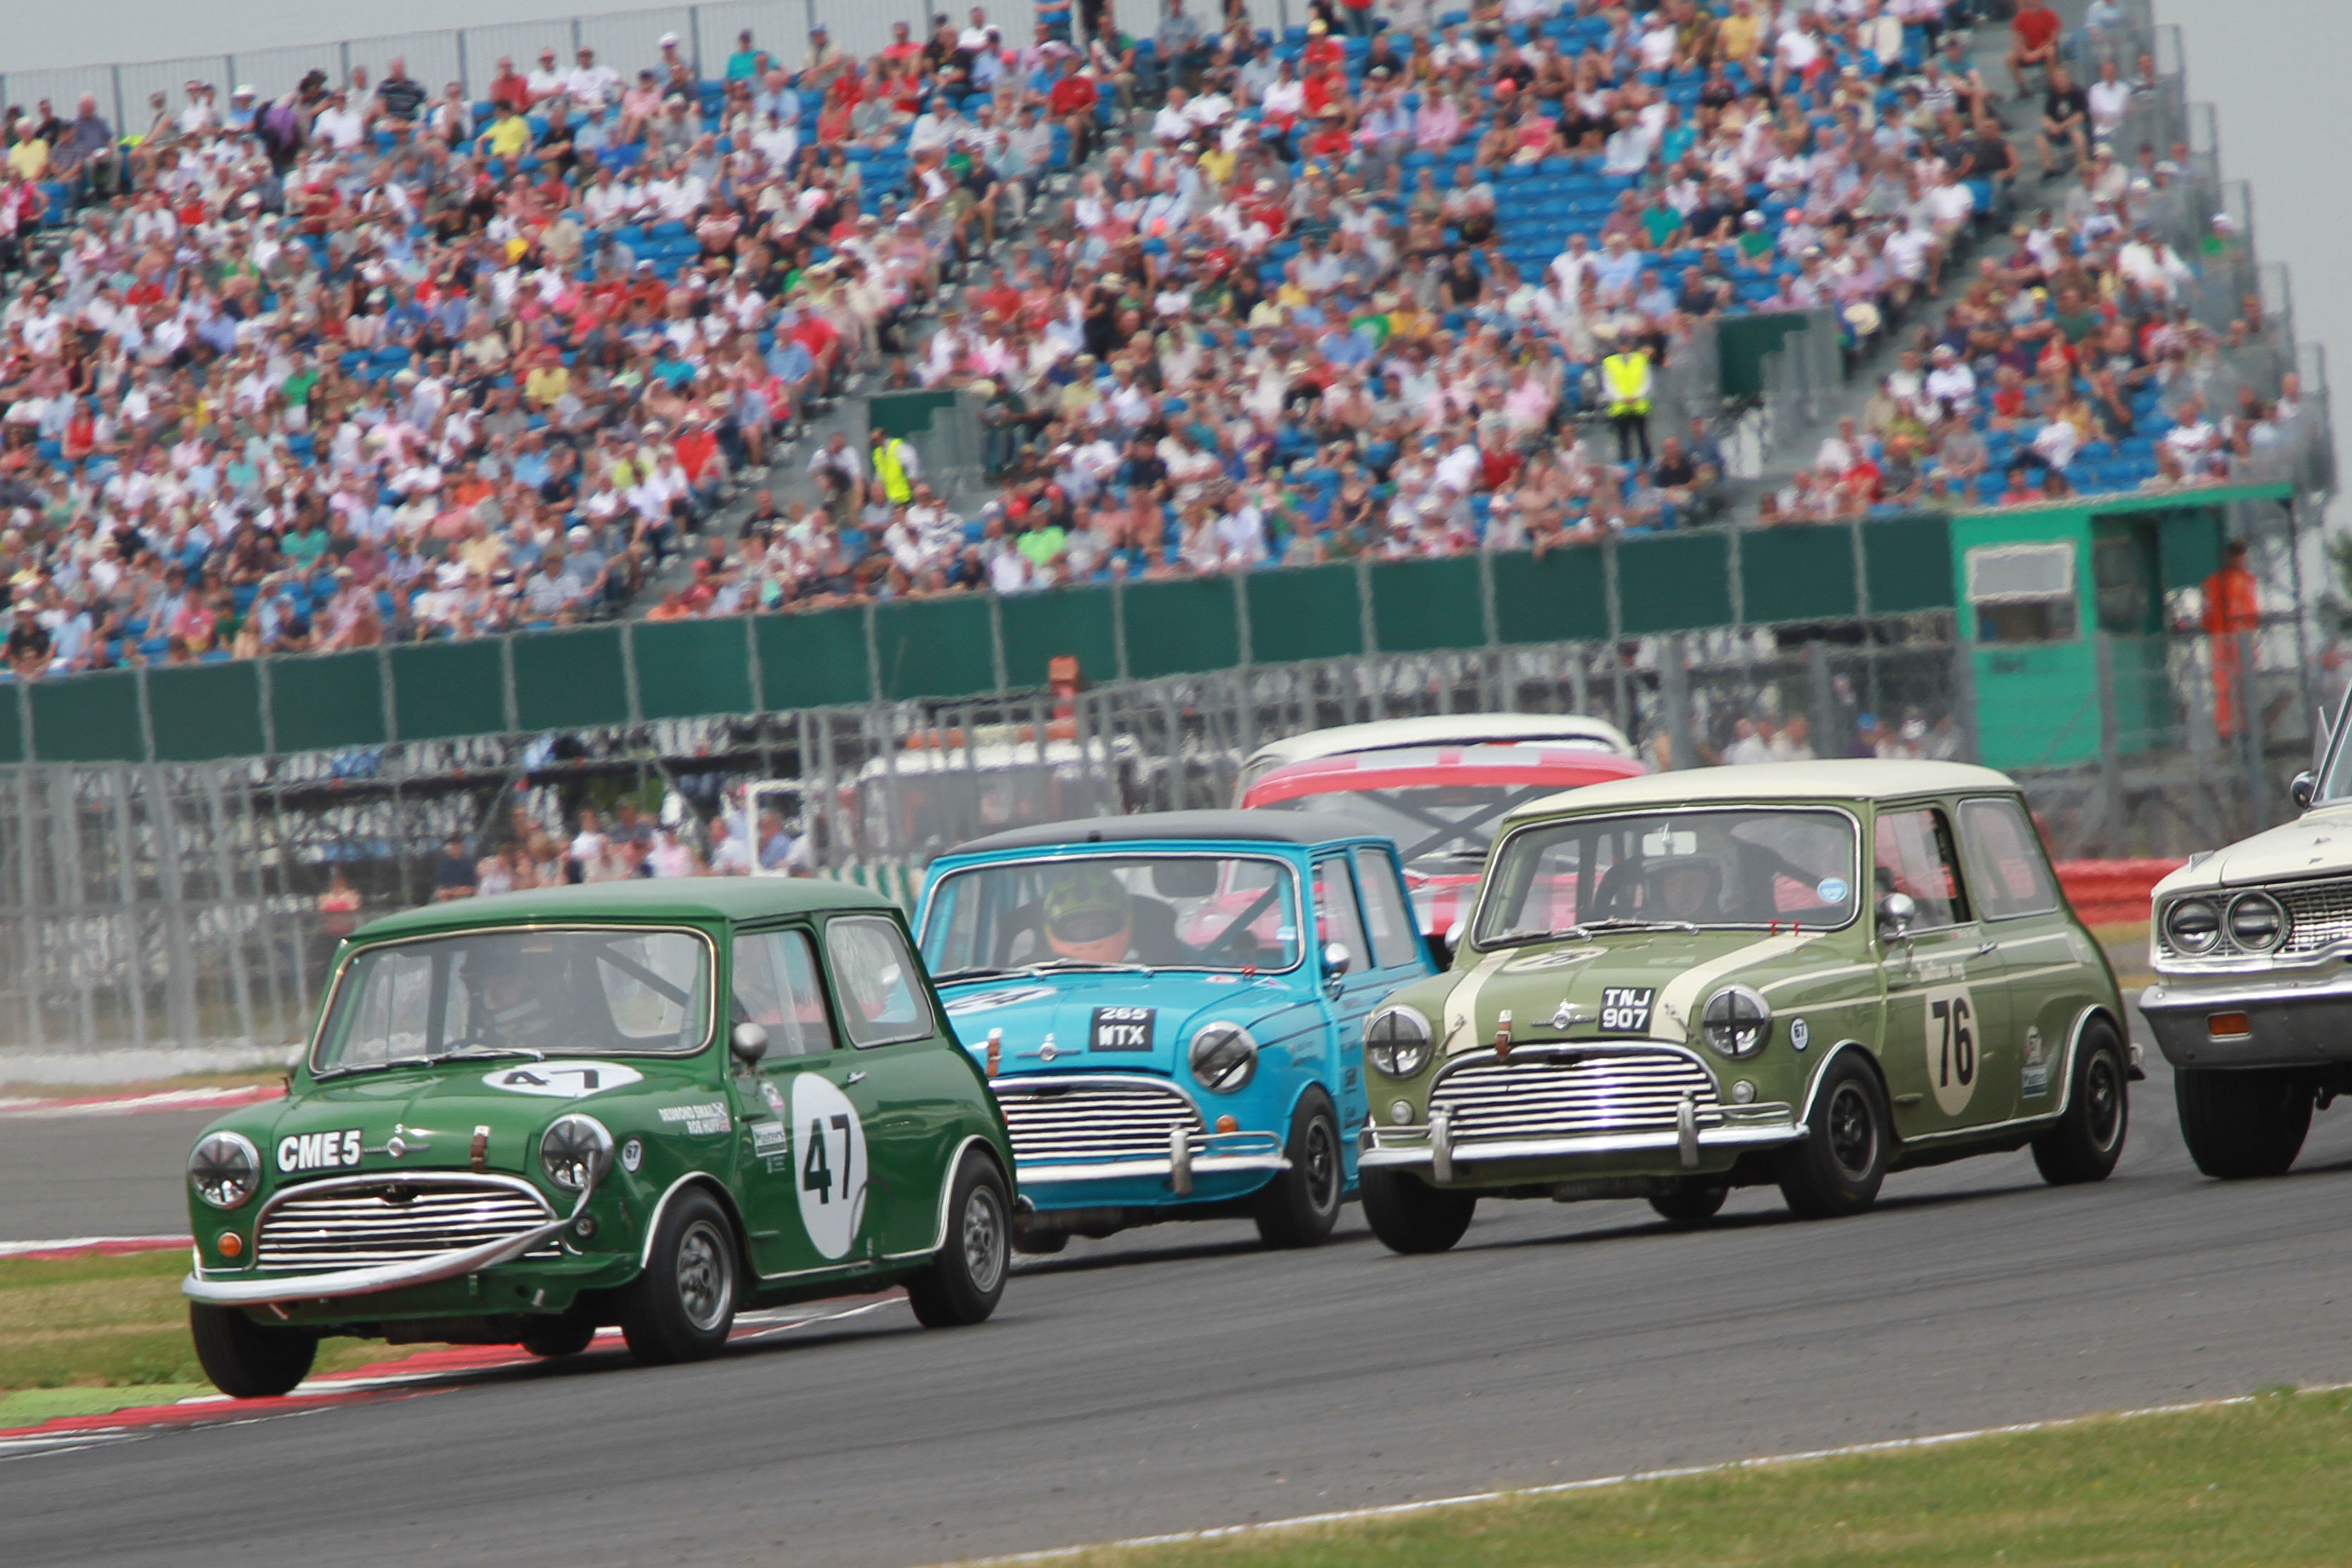 MInis Racing at the Silverstone Classic